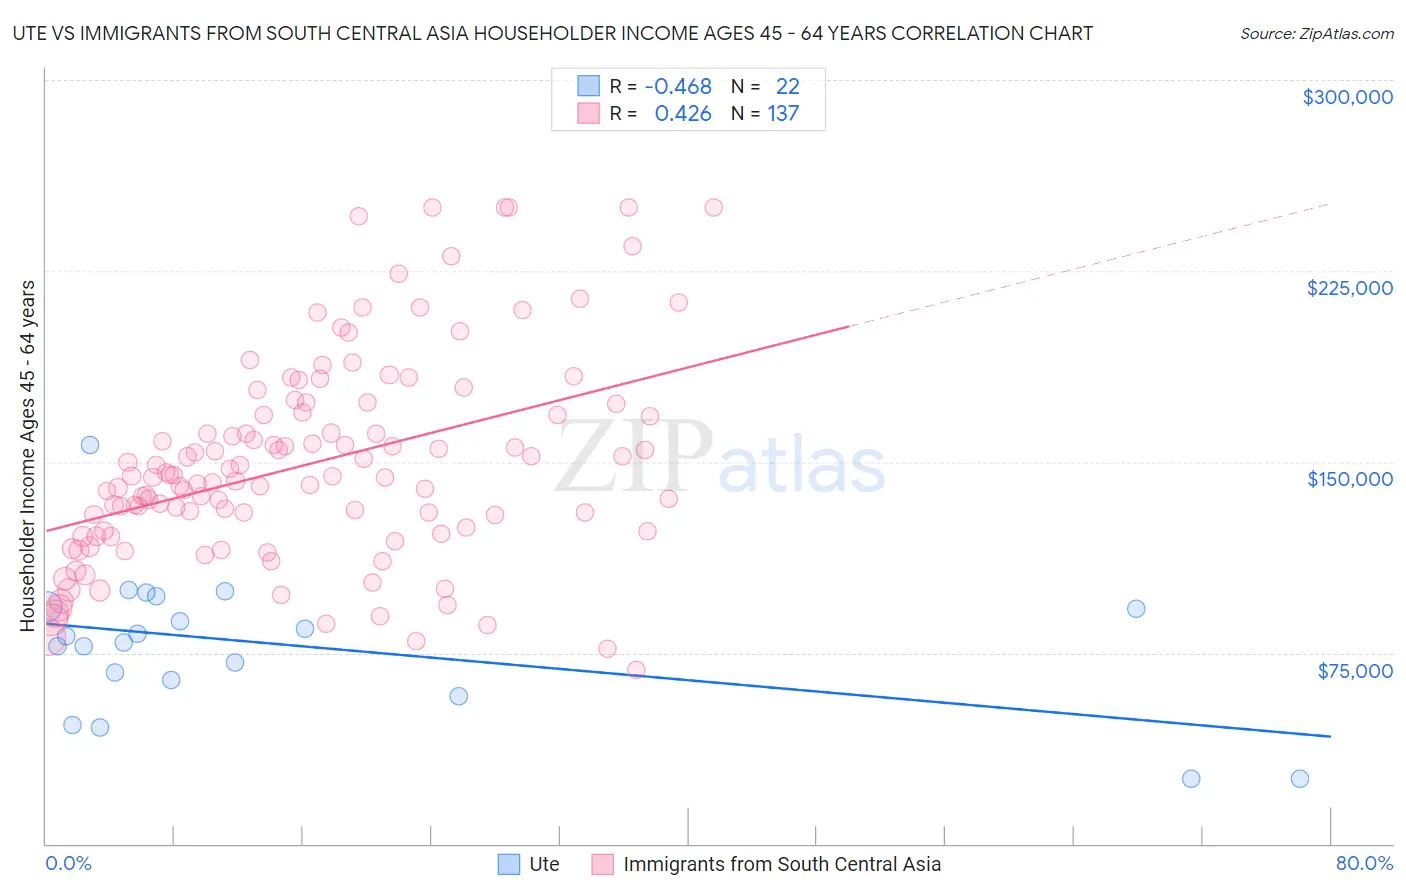 Ute vs Immigrants from South Central Asia Householder Income Ages 45 - 64 years